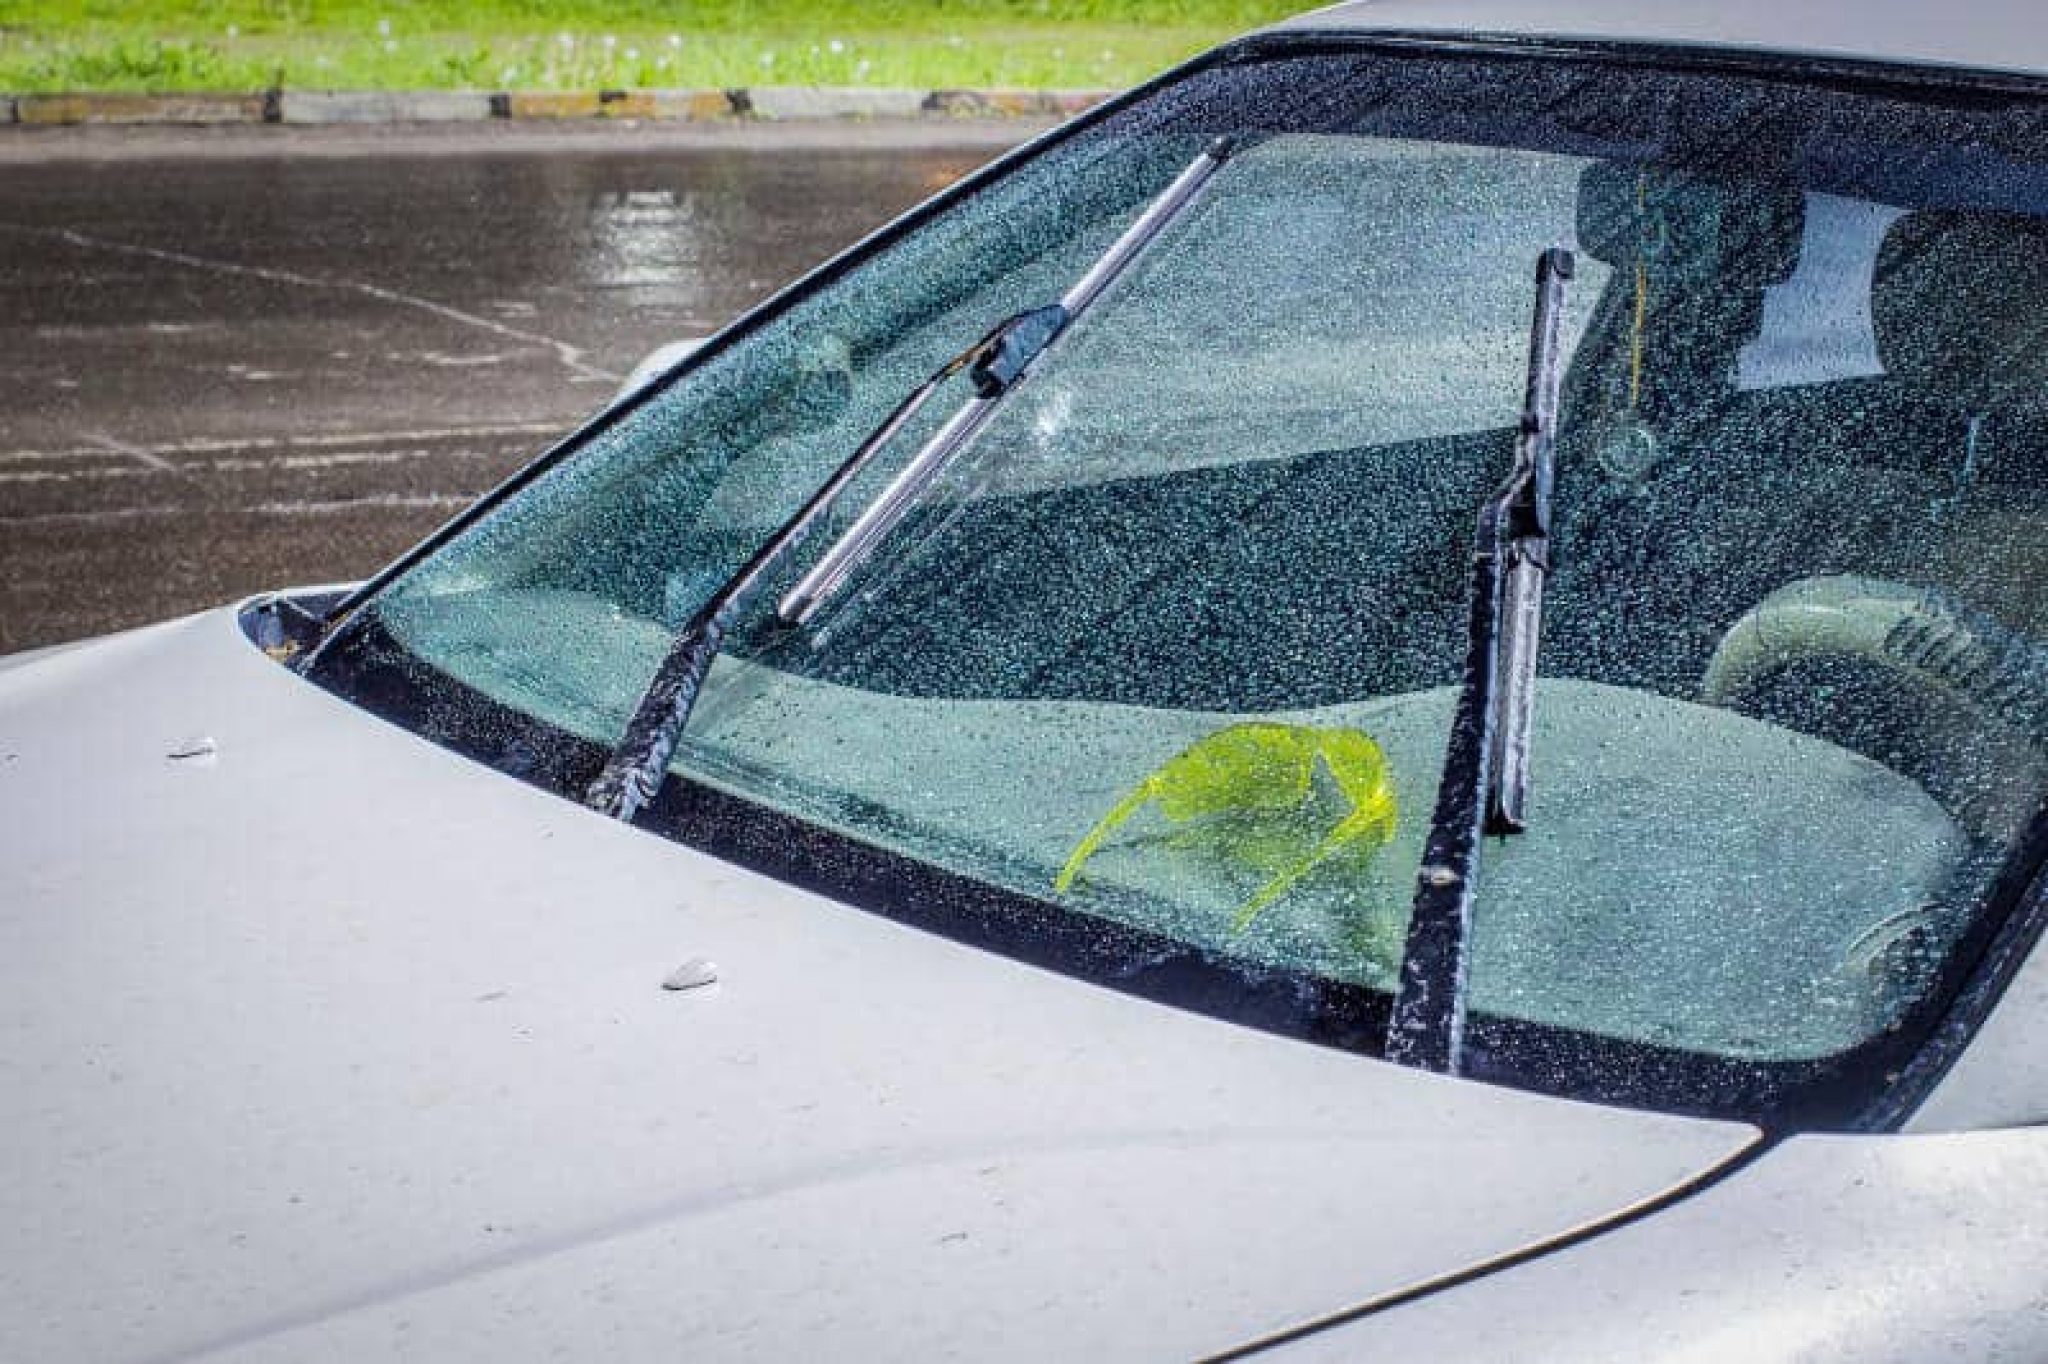 11 Best Windshield Car Wiper Blades to Buy in 2020 - Review